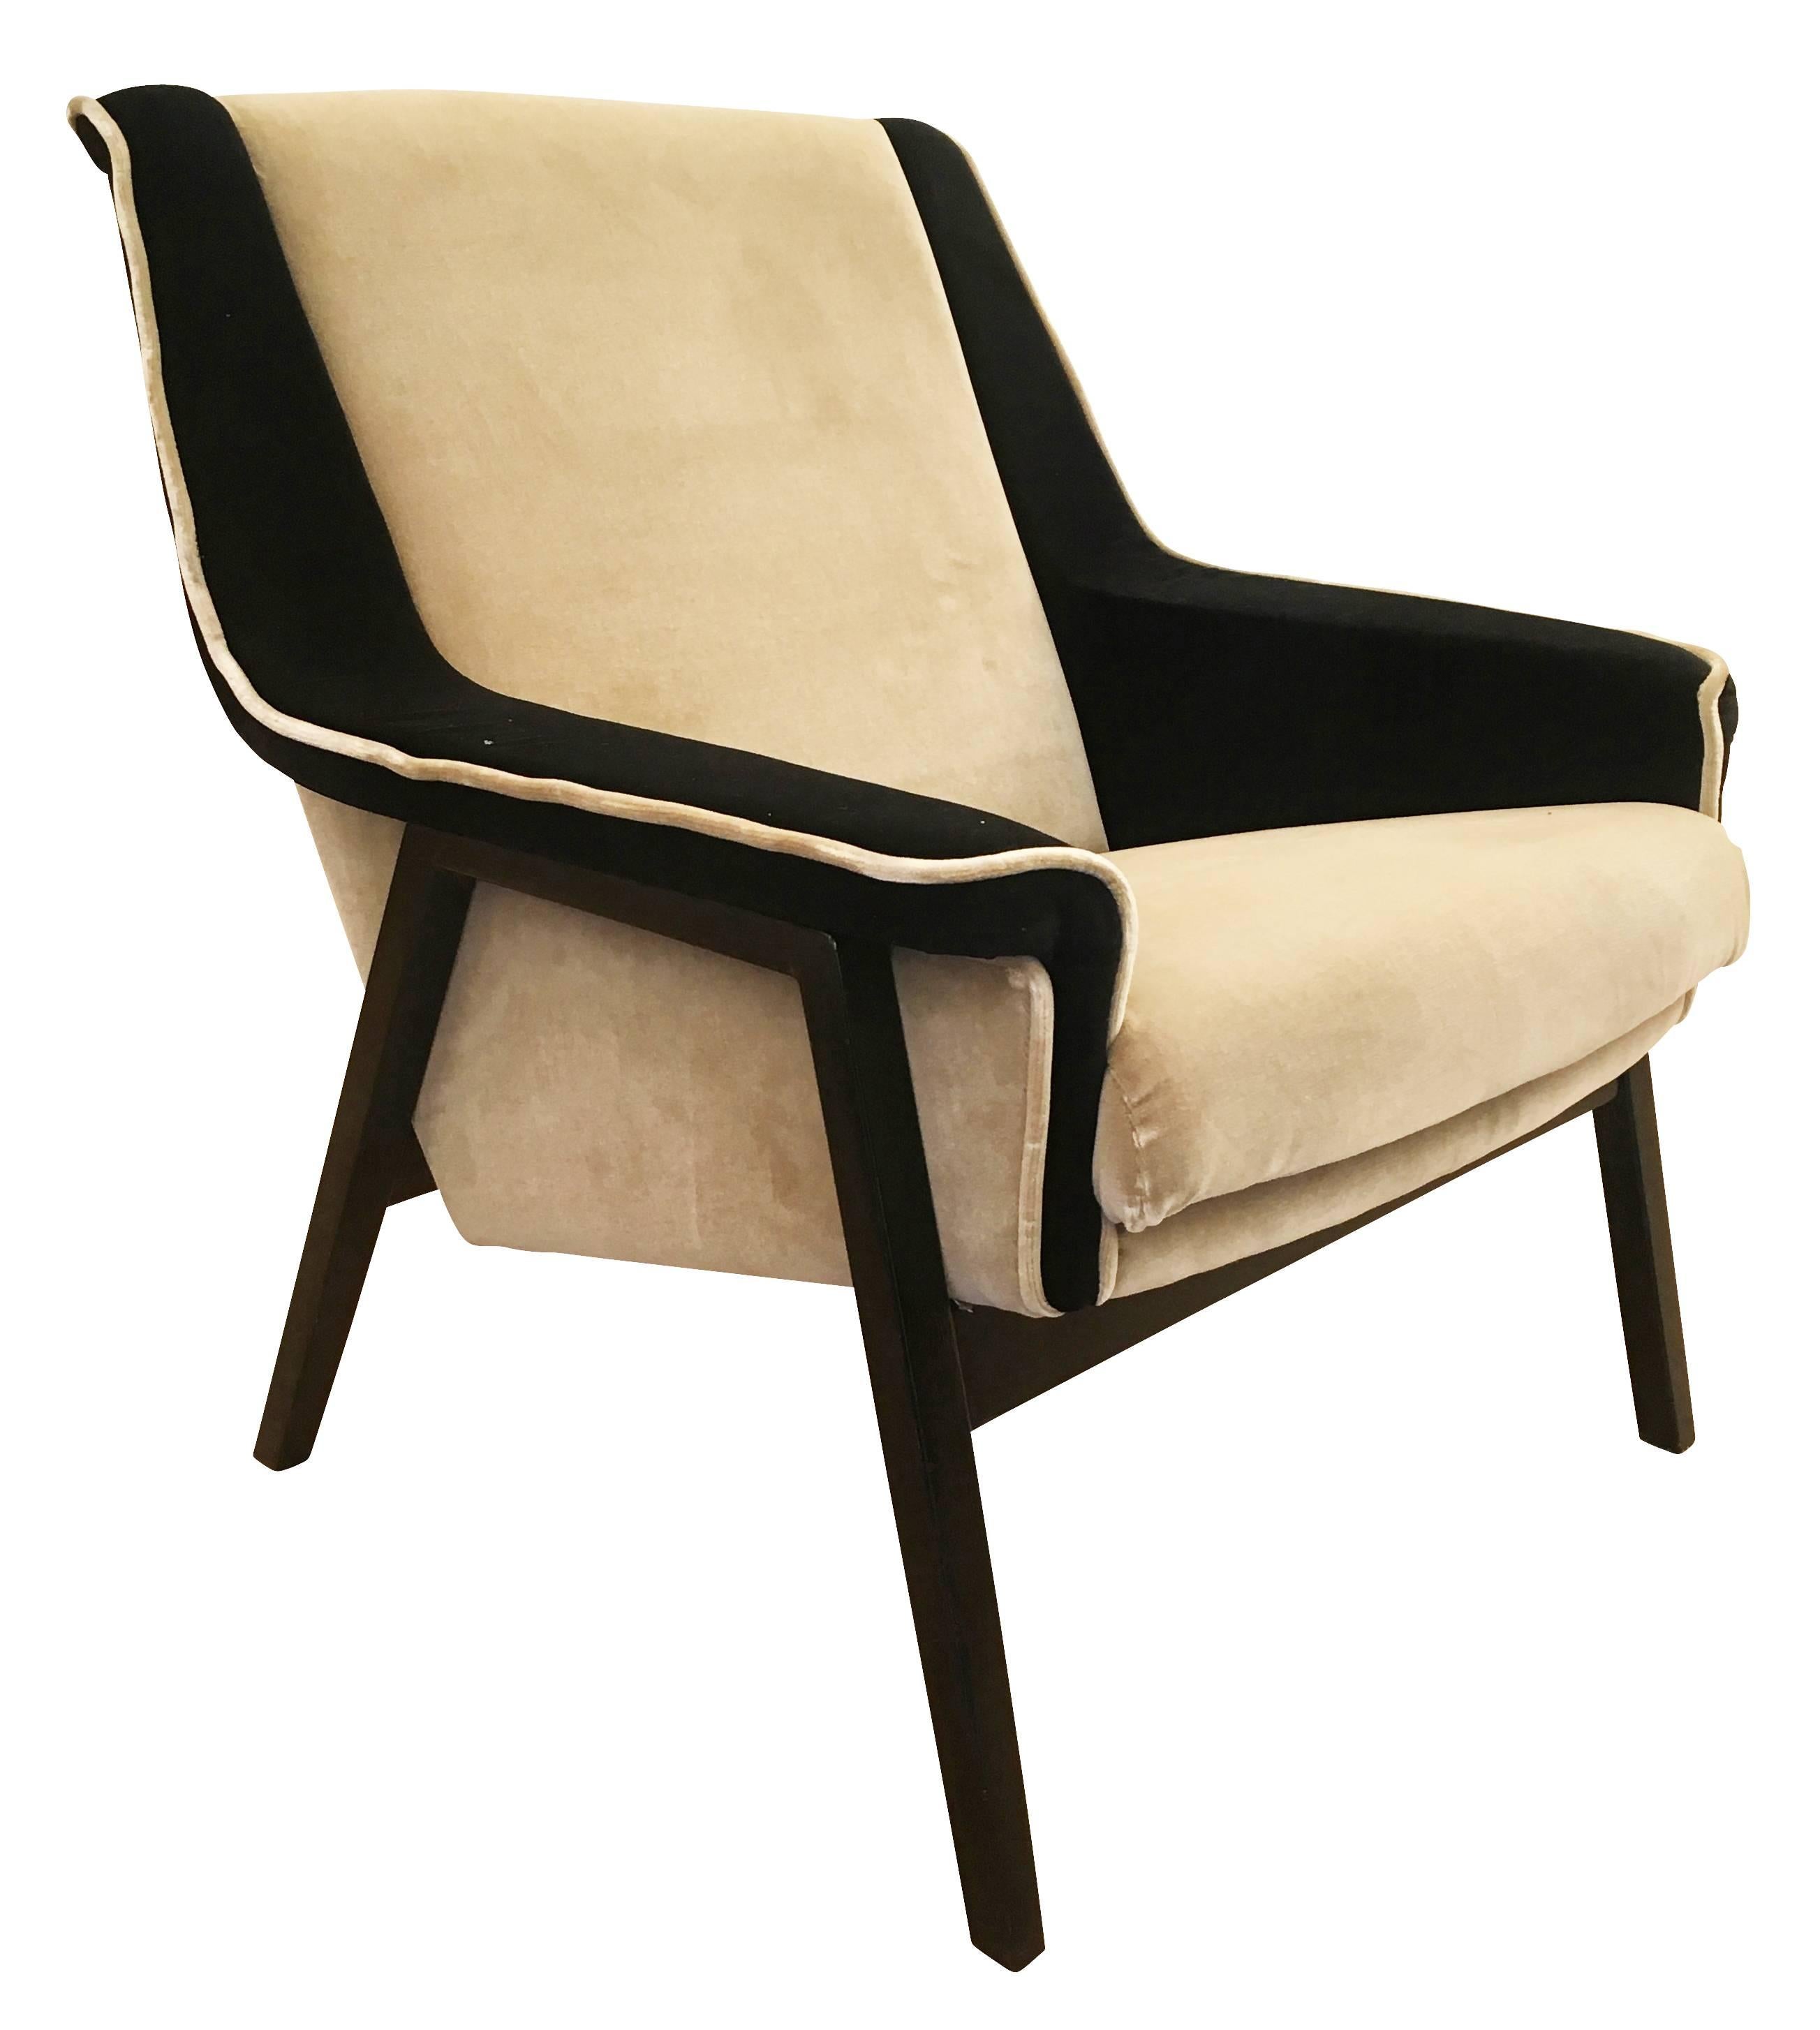 Pair of Italian midcentury armchairs in the manner of Gianfranco Frattini. They have been upholstered in a beige and black velvet. The wood legs are ebony.

Condition: Excellent vintage condition, minor wear consistent with age and use. Minor marks